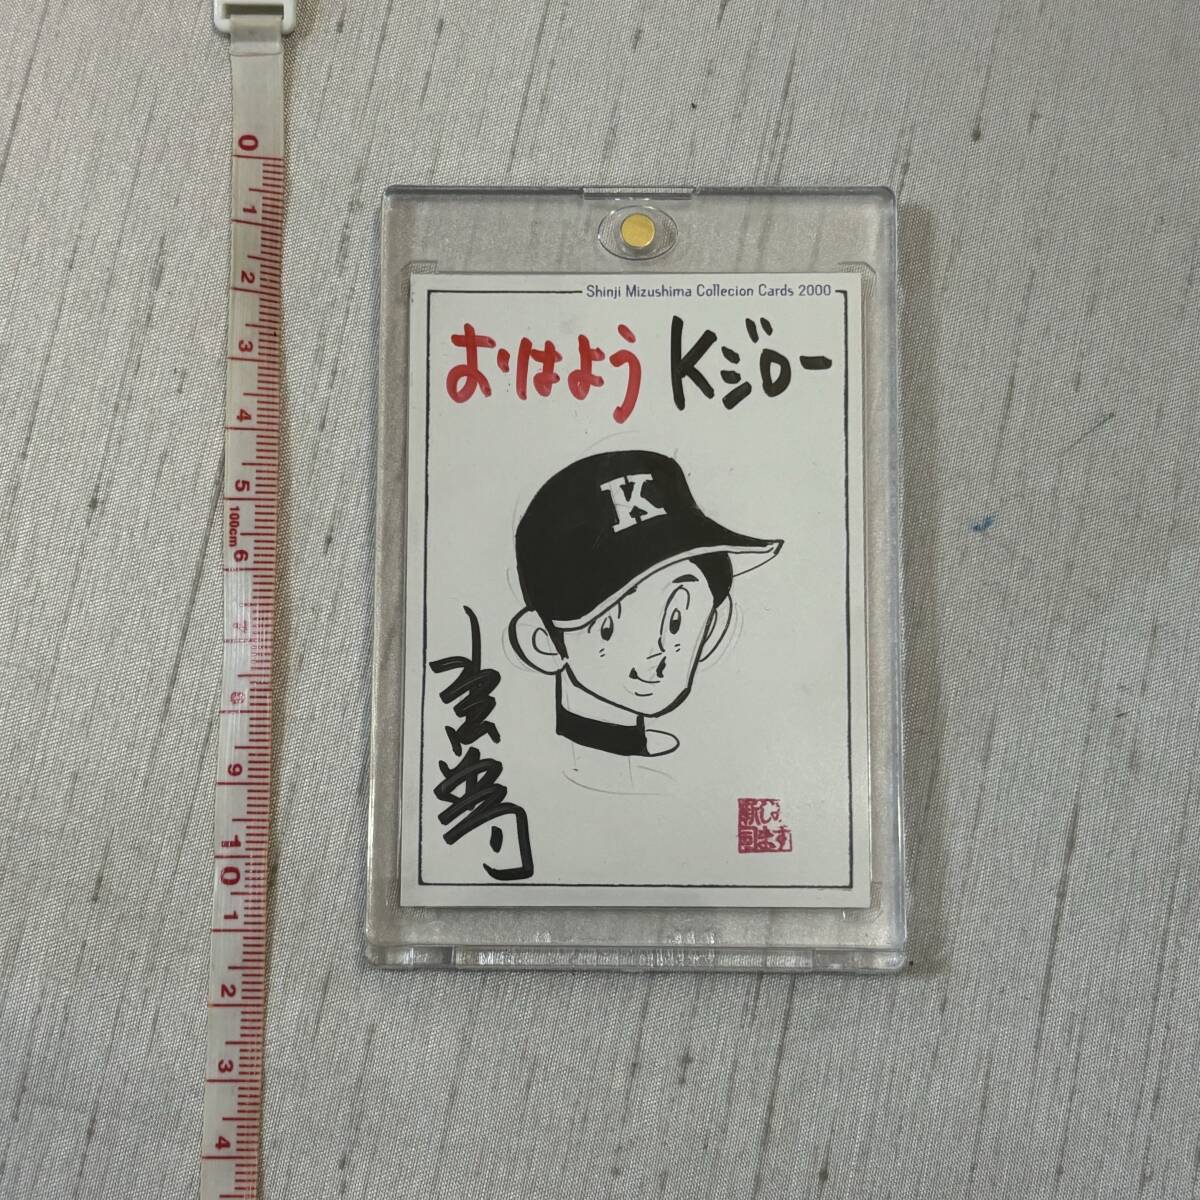 * water island new . collection card autograph illustration autograph attaching . is for Kji low /200 card serial number inspection ) anime 